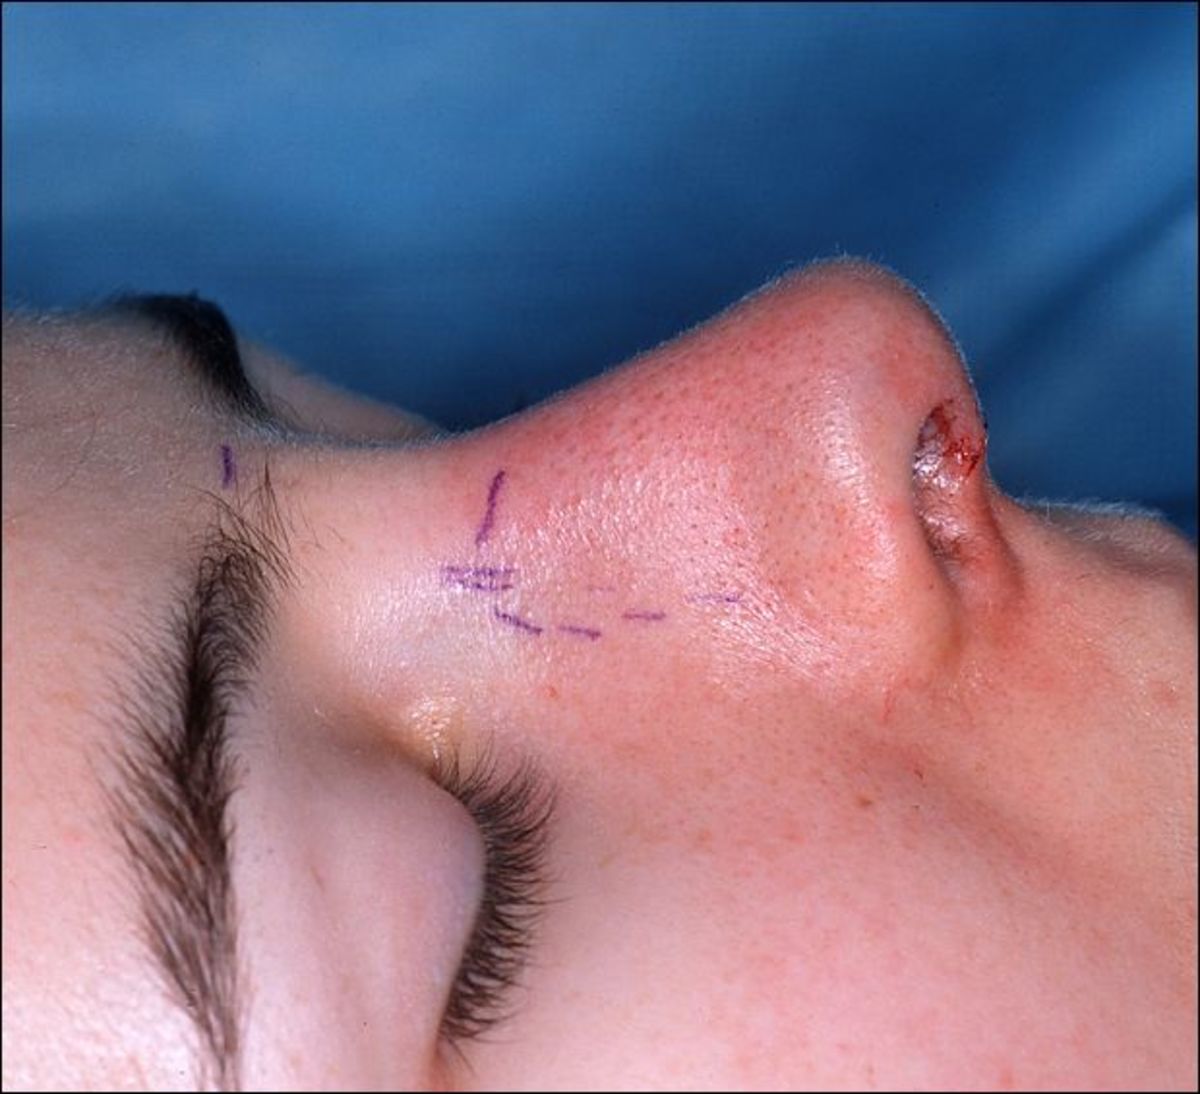 Post-operative photo of rhinoplasty. The marks guided the surgeon where to cut into bone.